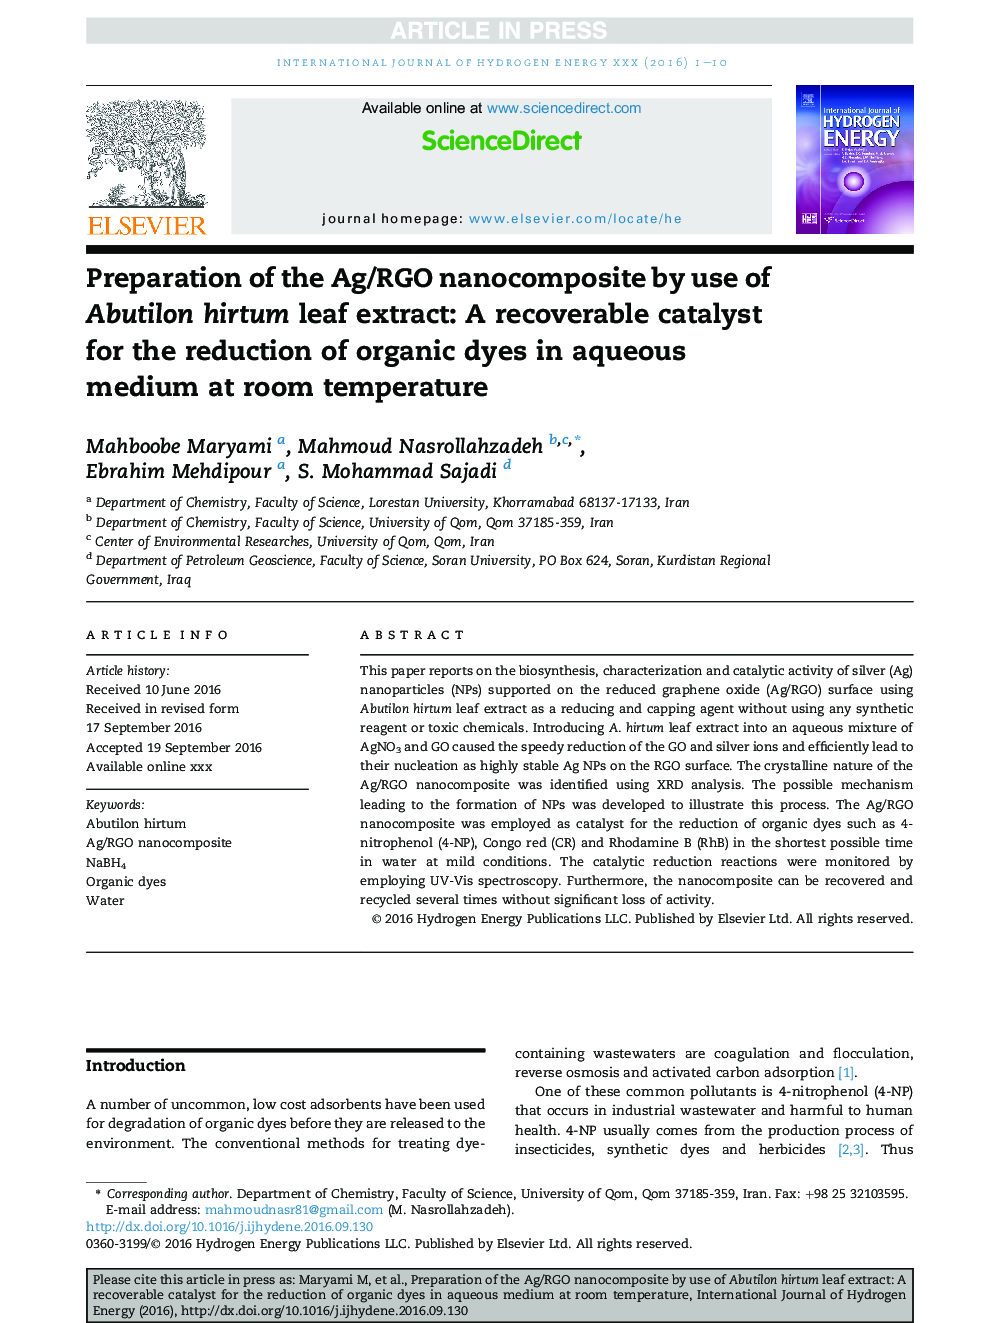 Preparation of the Ag/RGO nanocomposite by use of Abutilon hirtum leaf extract: A recoverable catalyst for the reduction of organic dyes in aqueous medium at room temperature